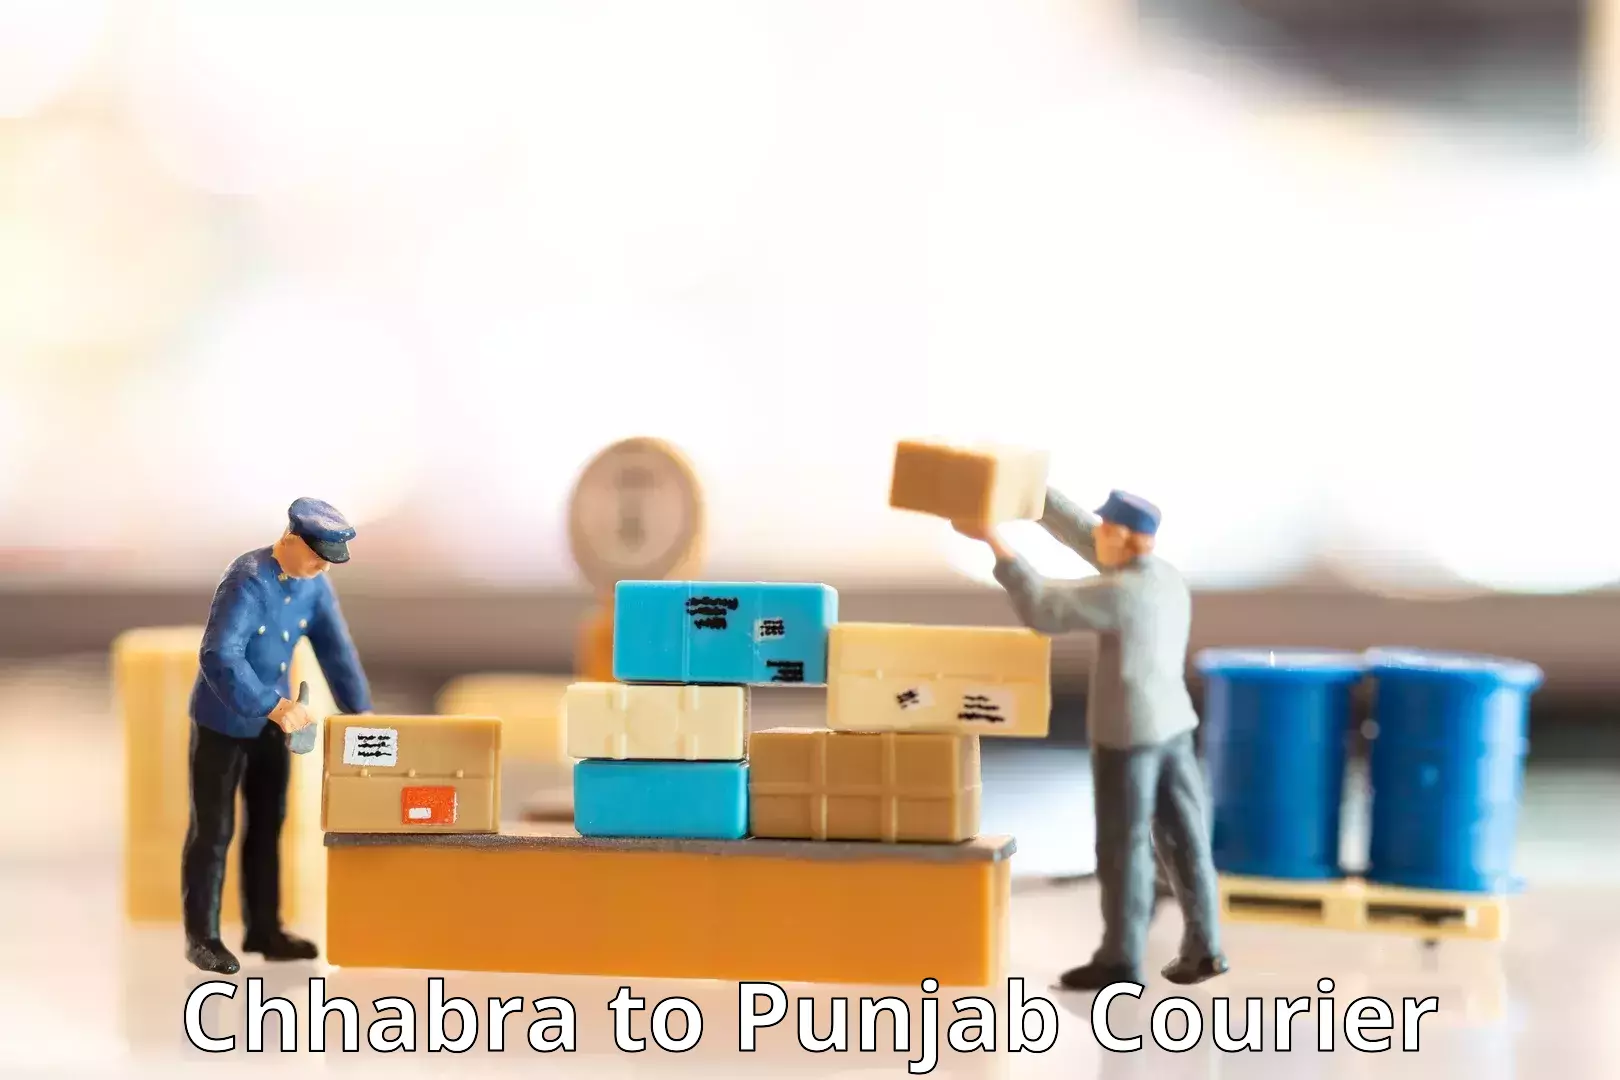 Express delivery network Chhabra to Punjab